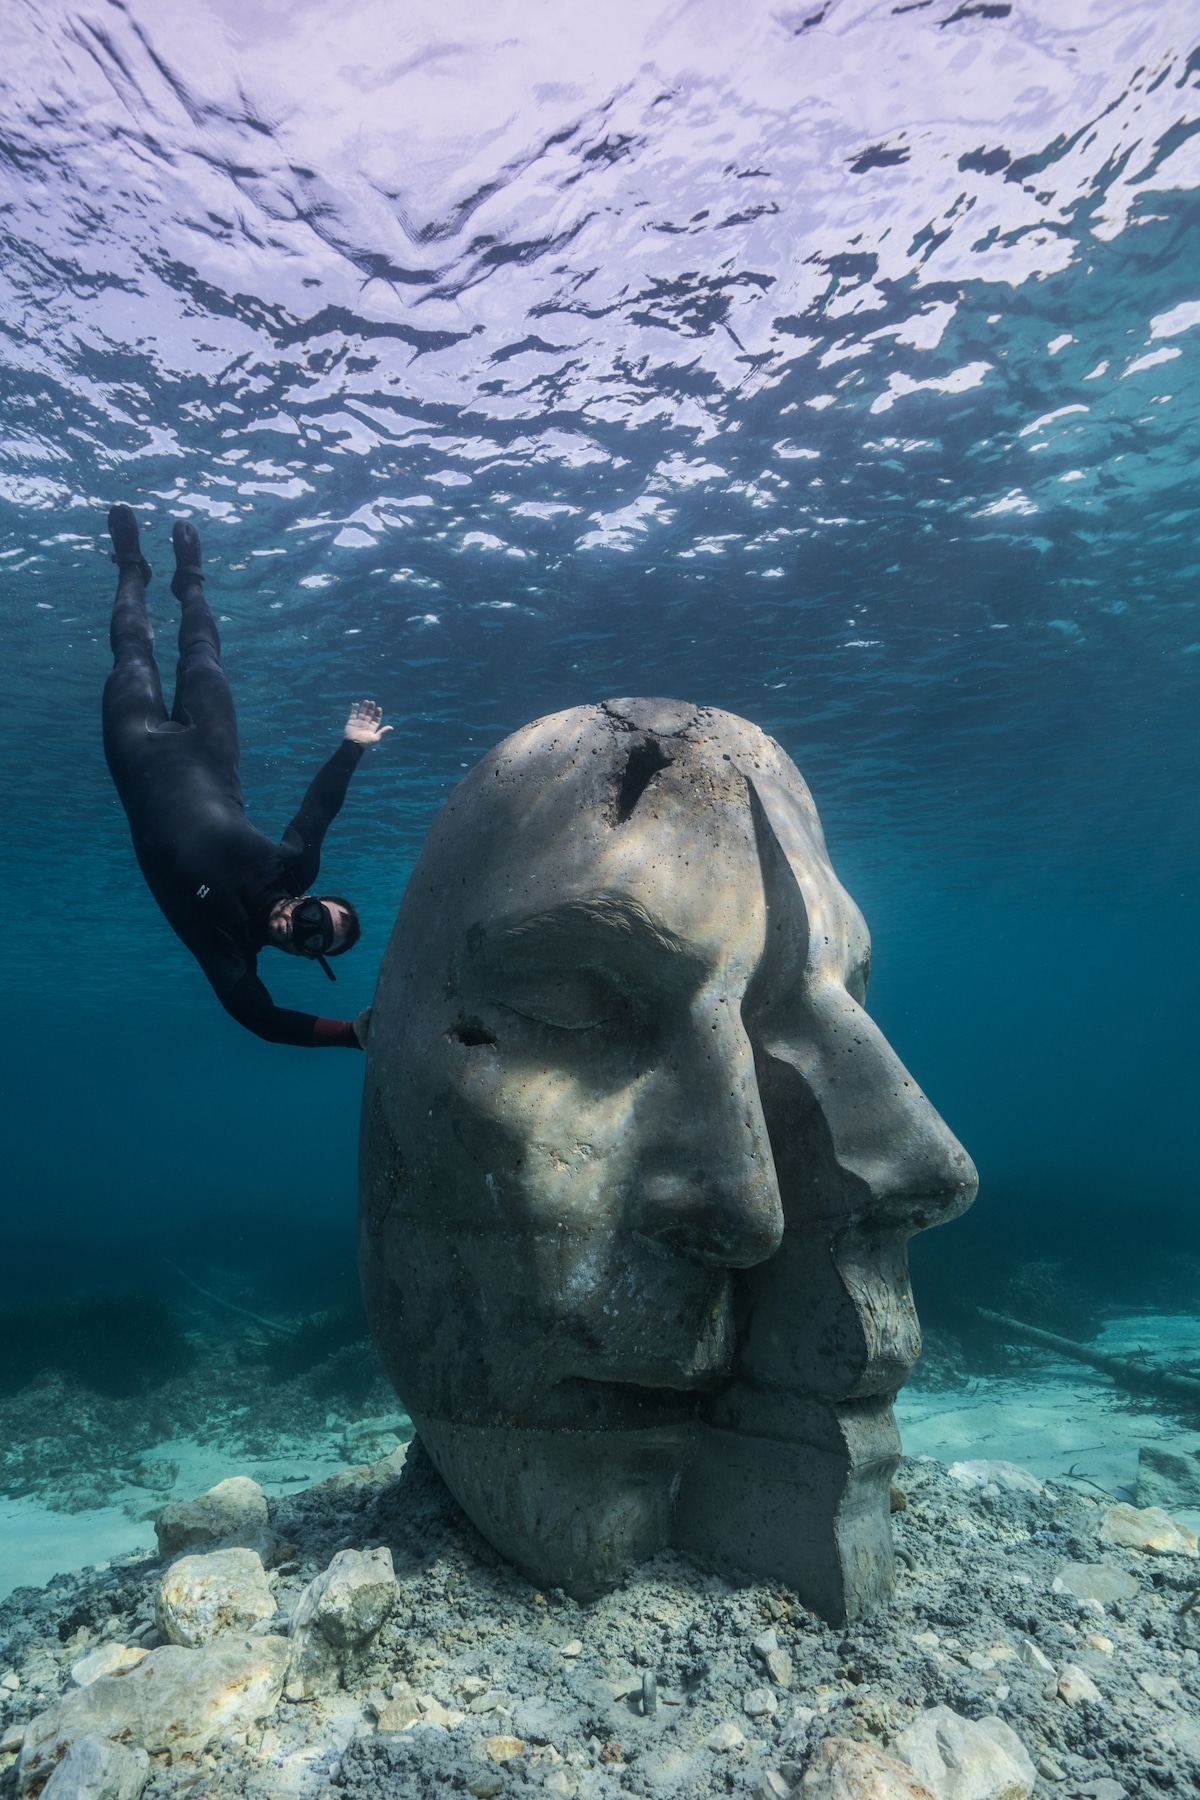 Jason deCaires Taylor’s Cannes Underwater Museum Features Monumental Submerged Masks 